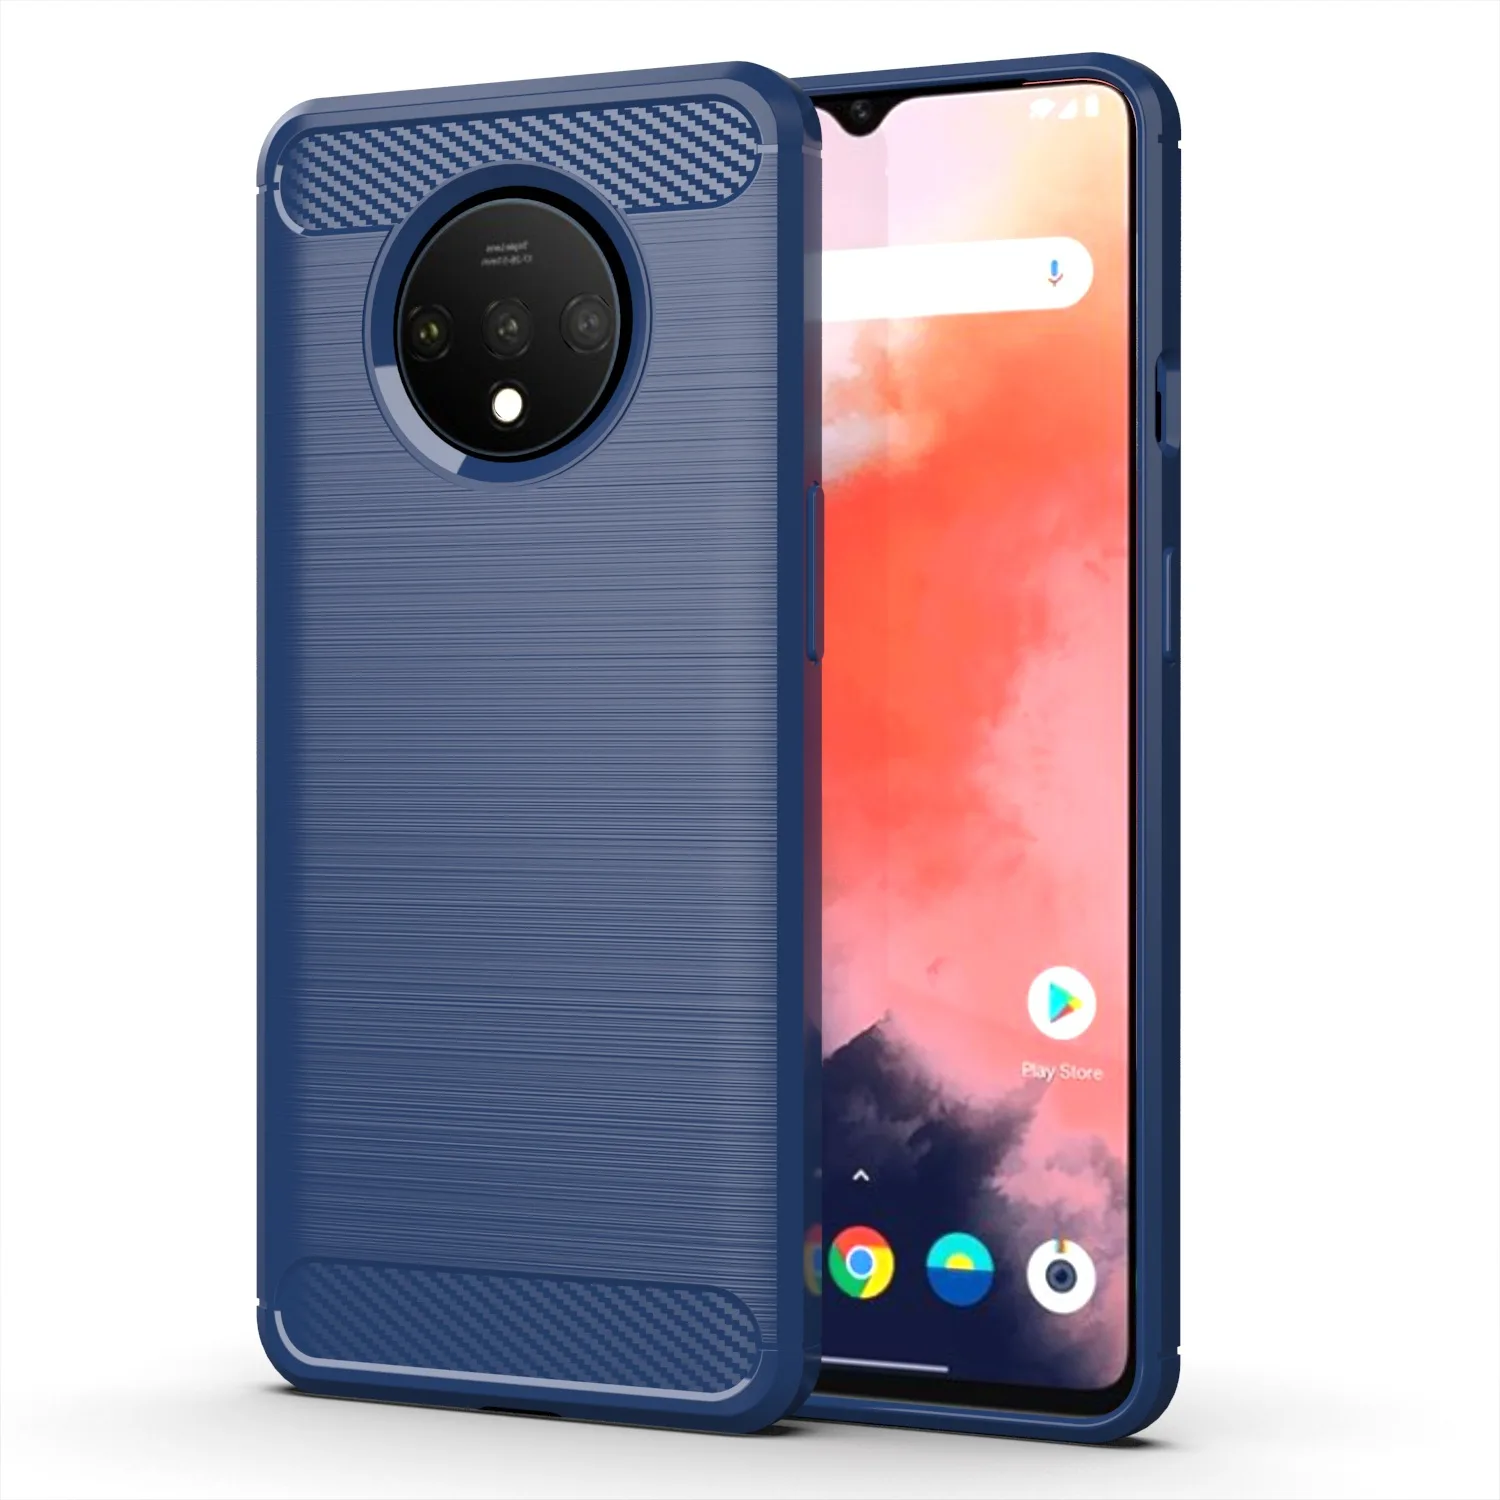 Brushed Texture Case For 1+7t Oneplus 7T Silicone Cases for Oneplus7t One Plus 7T Luxury Carbon Fiber Soft TPU Phone Cover images - 6